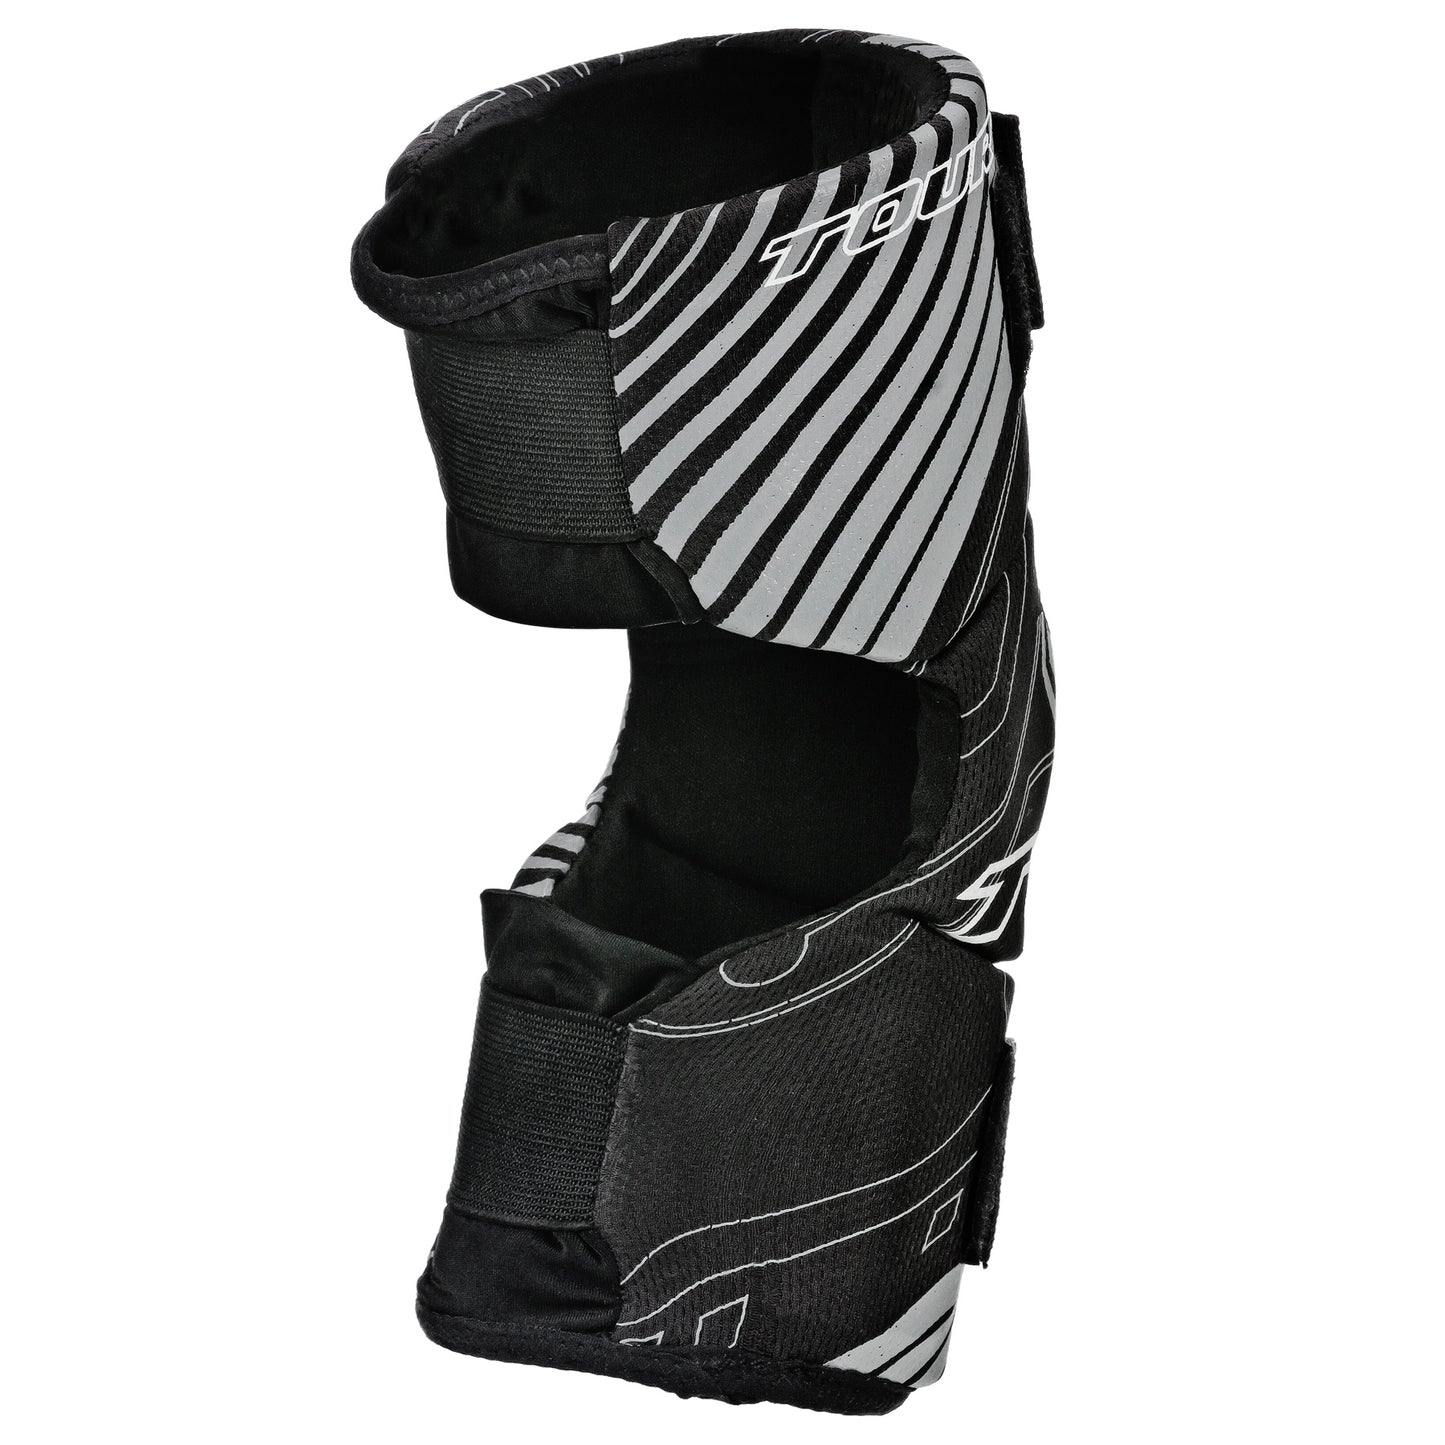 Code Activ Adult Elbow Pad